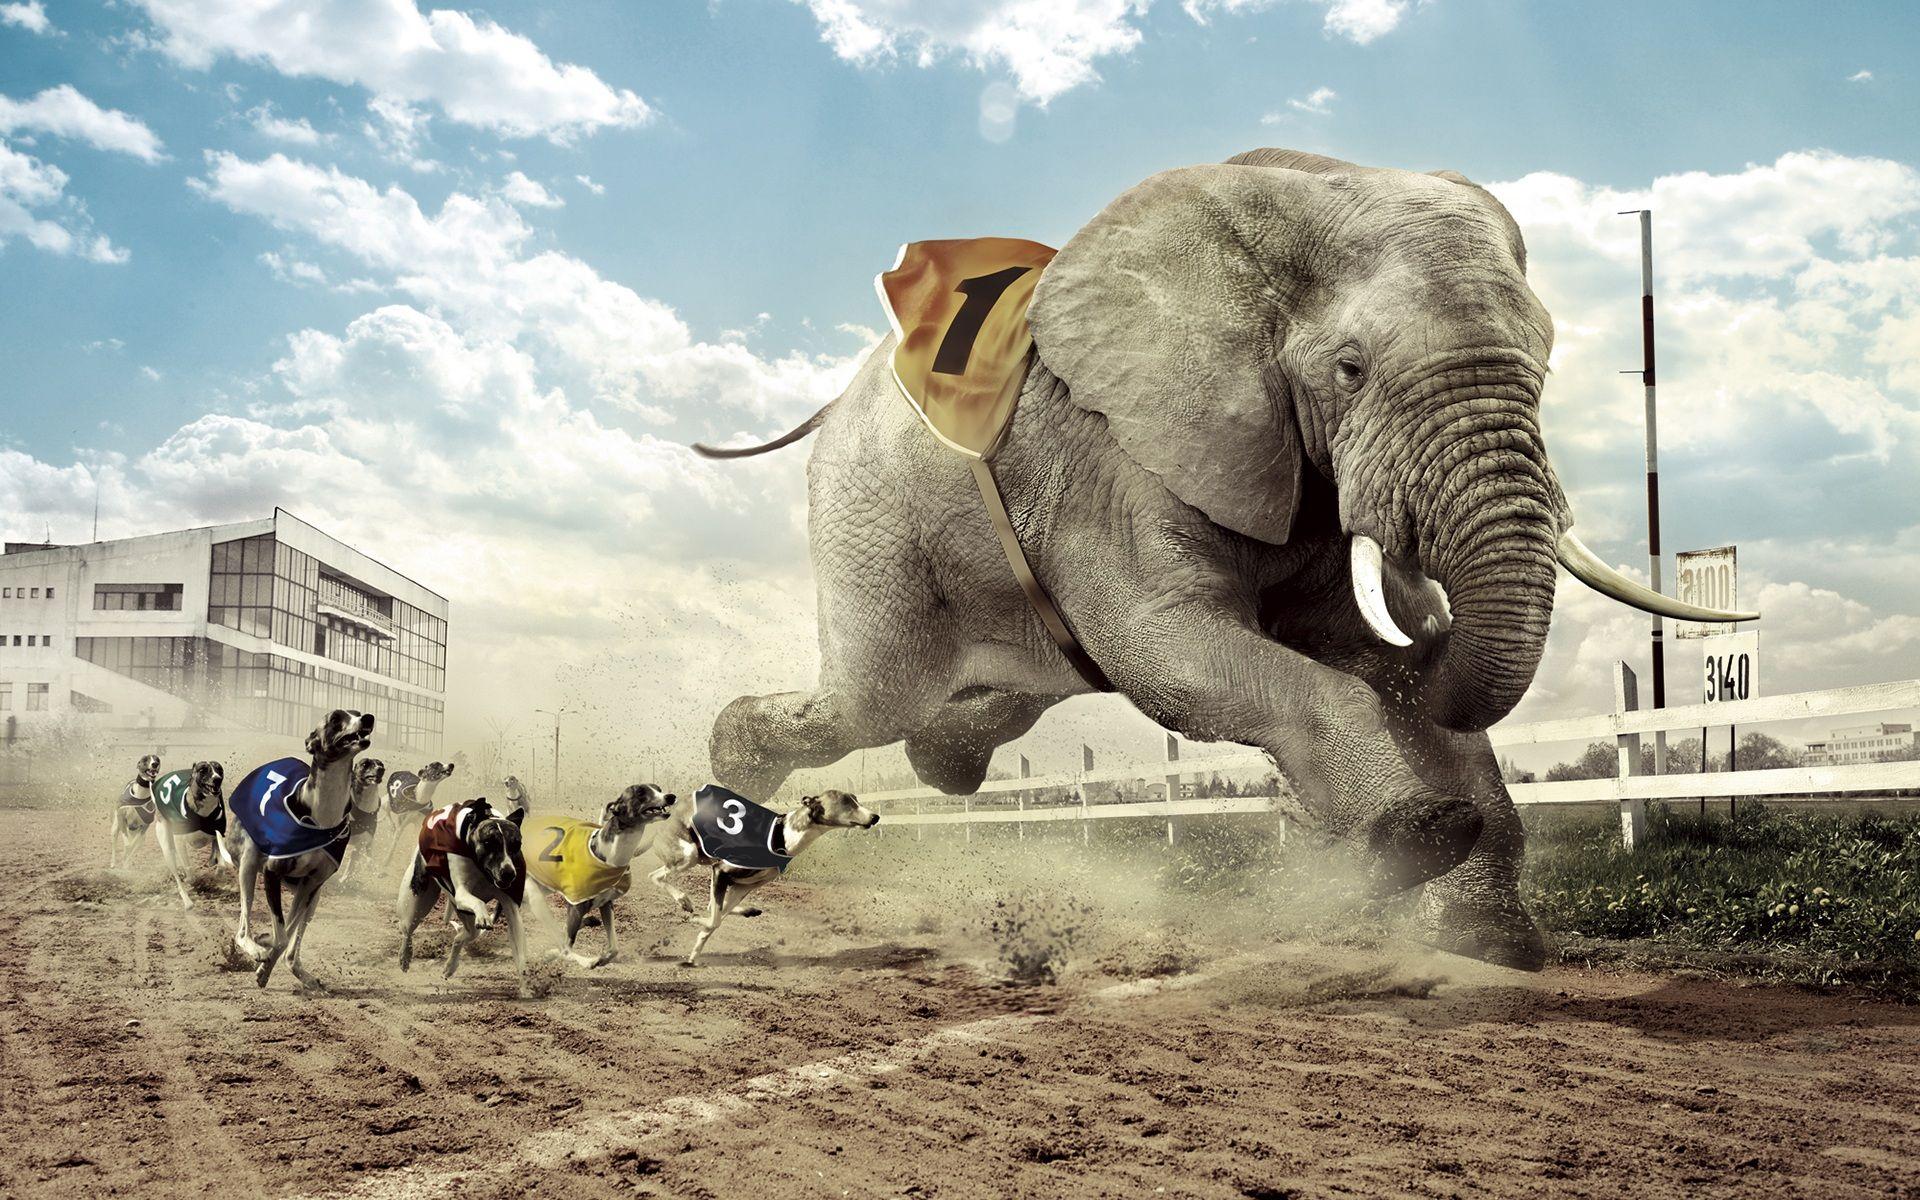 Download Wallpaper 1920x1200 Creative design, dog and elephant race